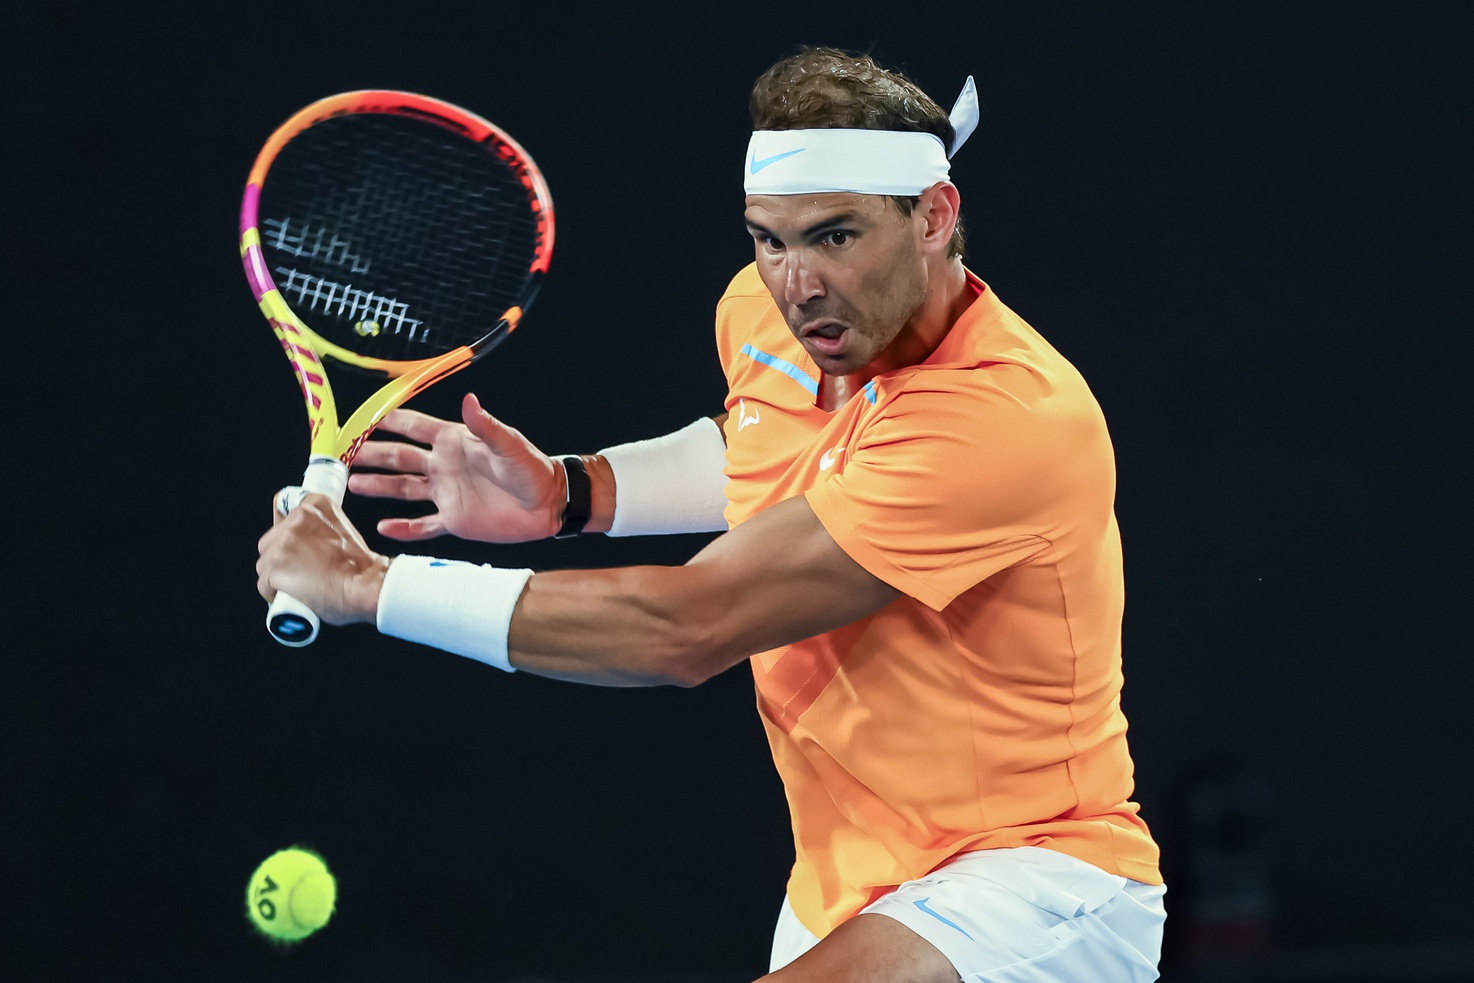 ATP Rome Best Bets Including Nadal vs Bergs